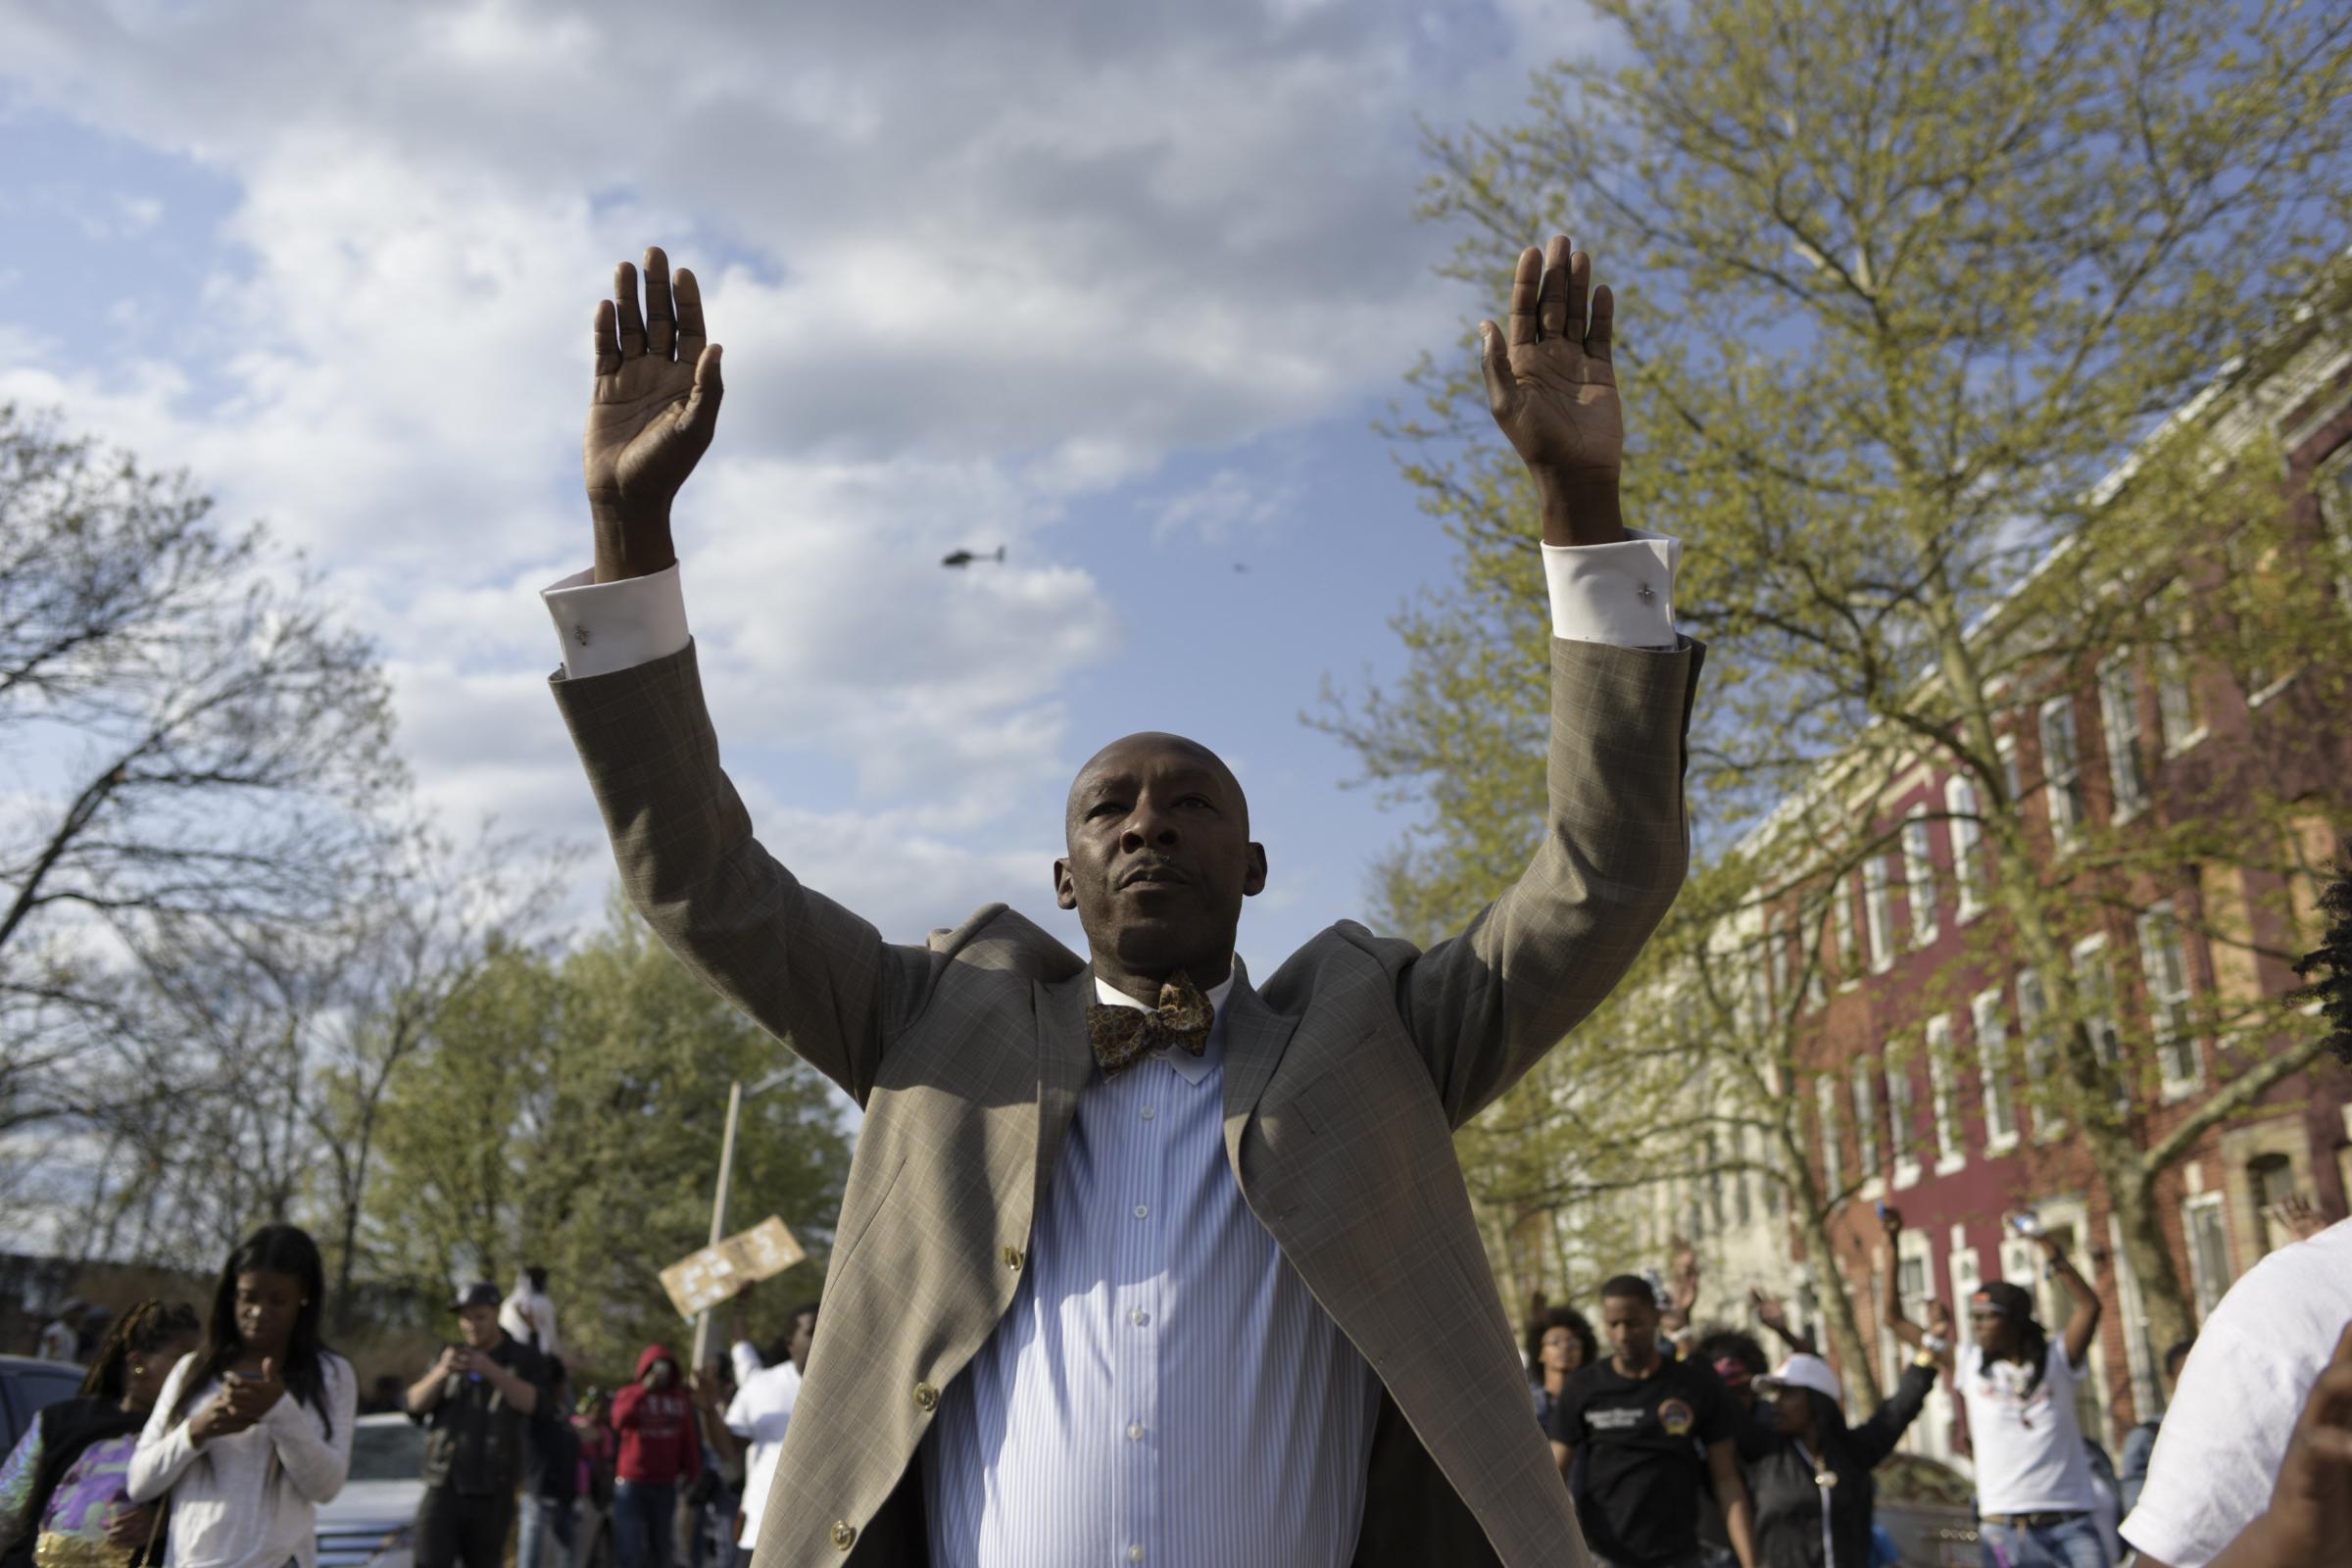 Edward Mazyck and hundreds of other protesters march through Baltimore over the death of Freddie Gray, who died after suffering a severe spinal cord injury in police custody.